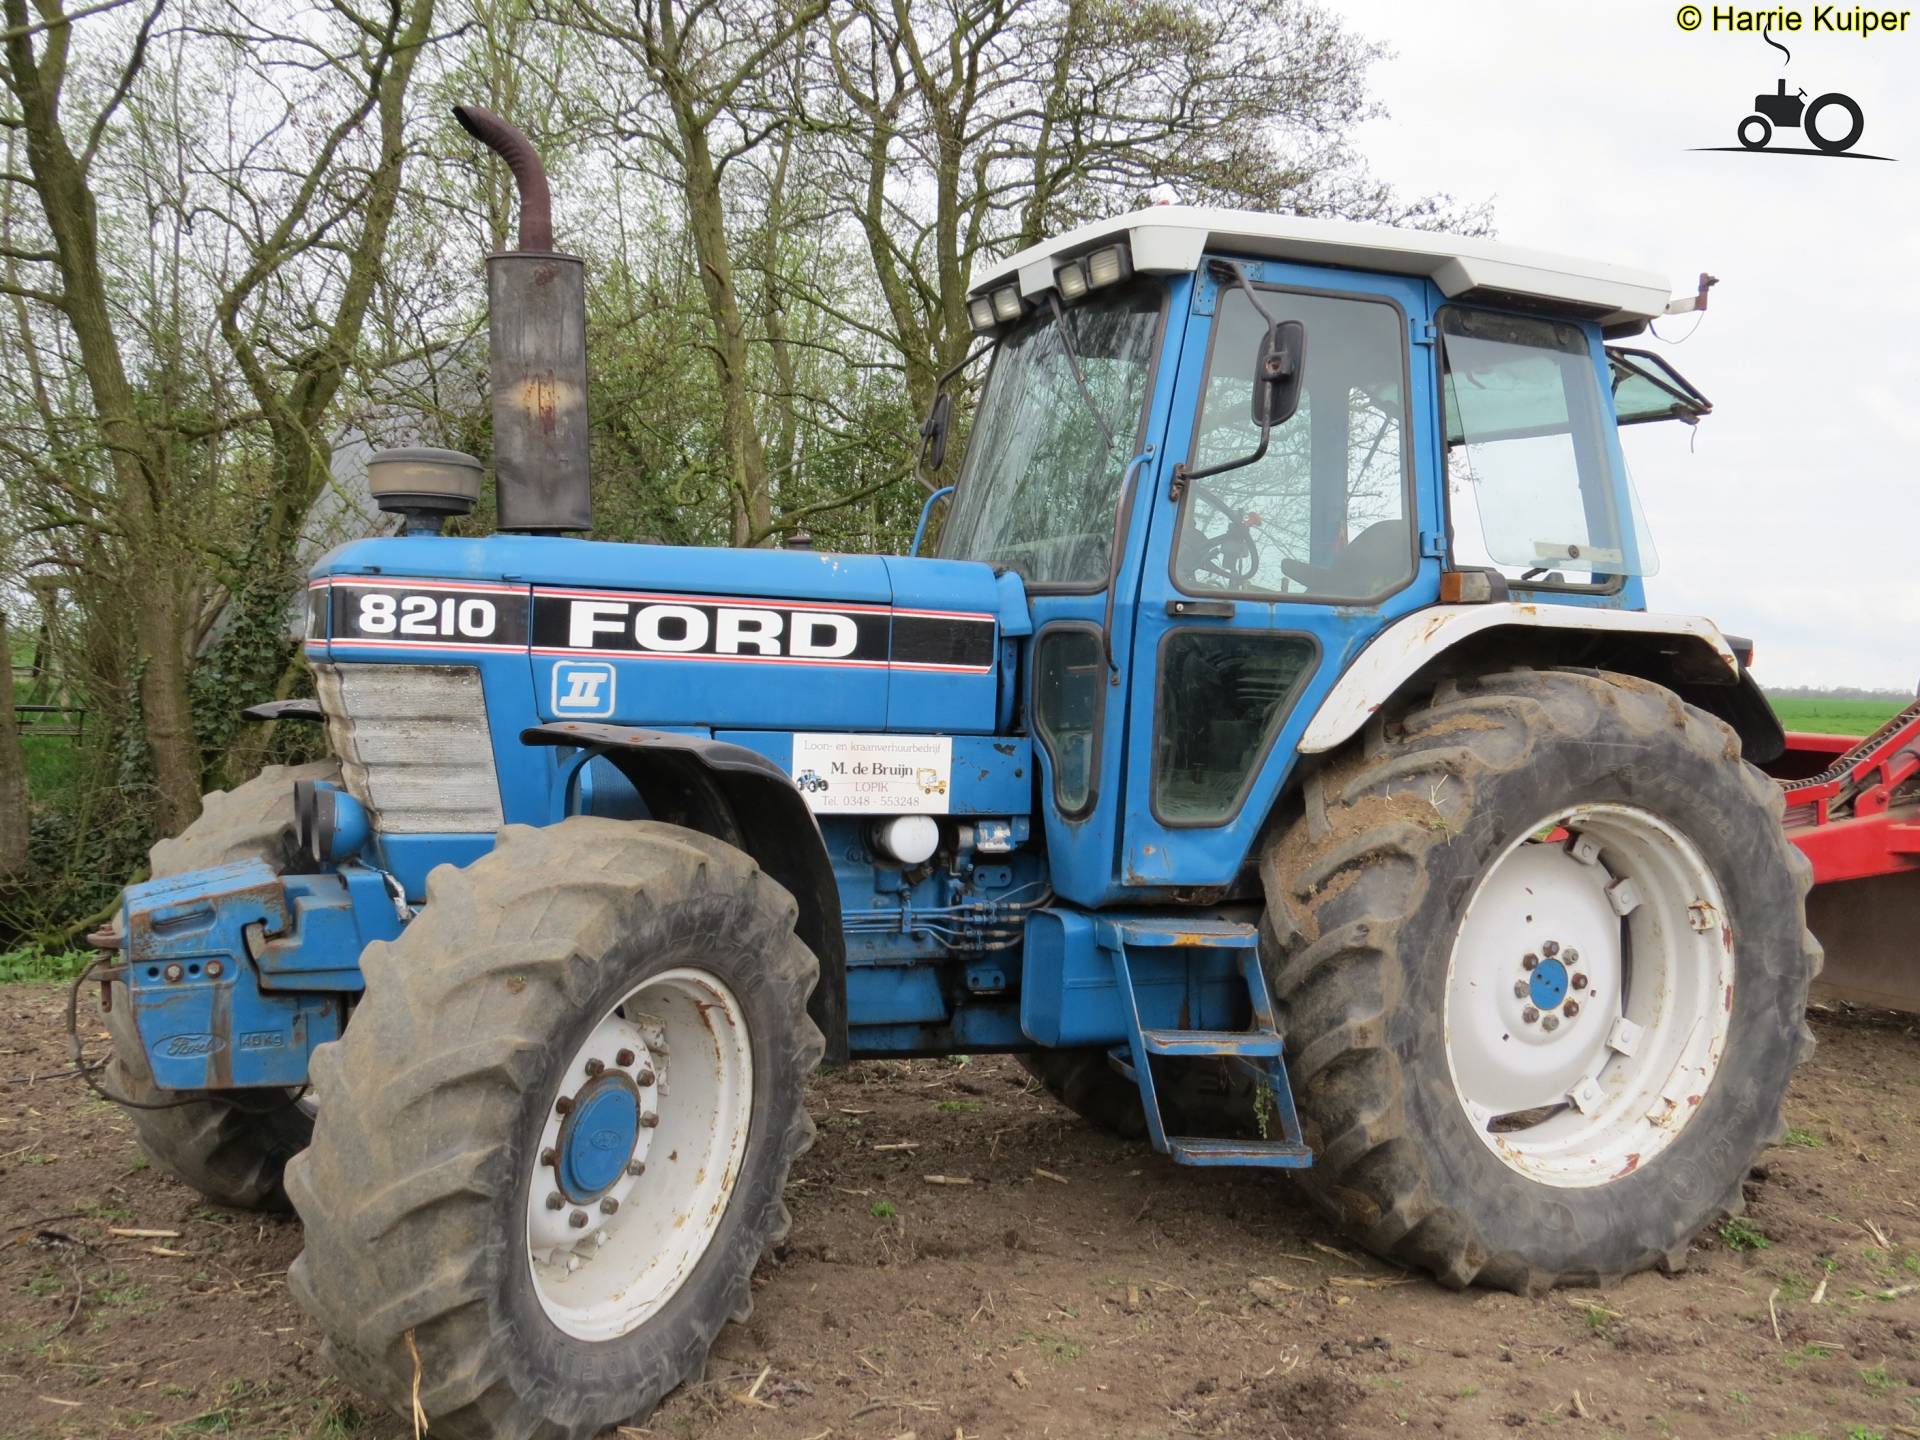 Ford 8210 France Tracteur Image 1154783